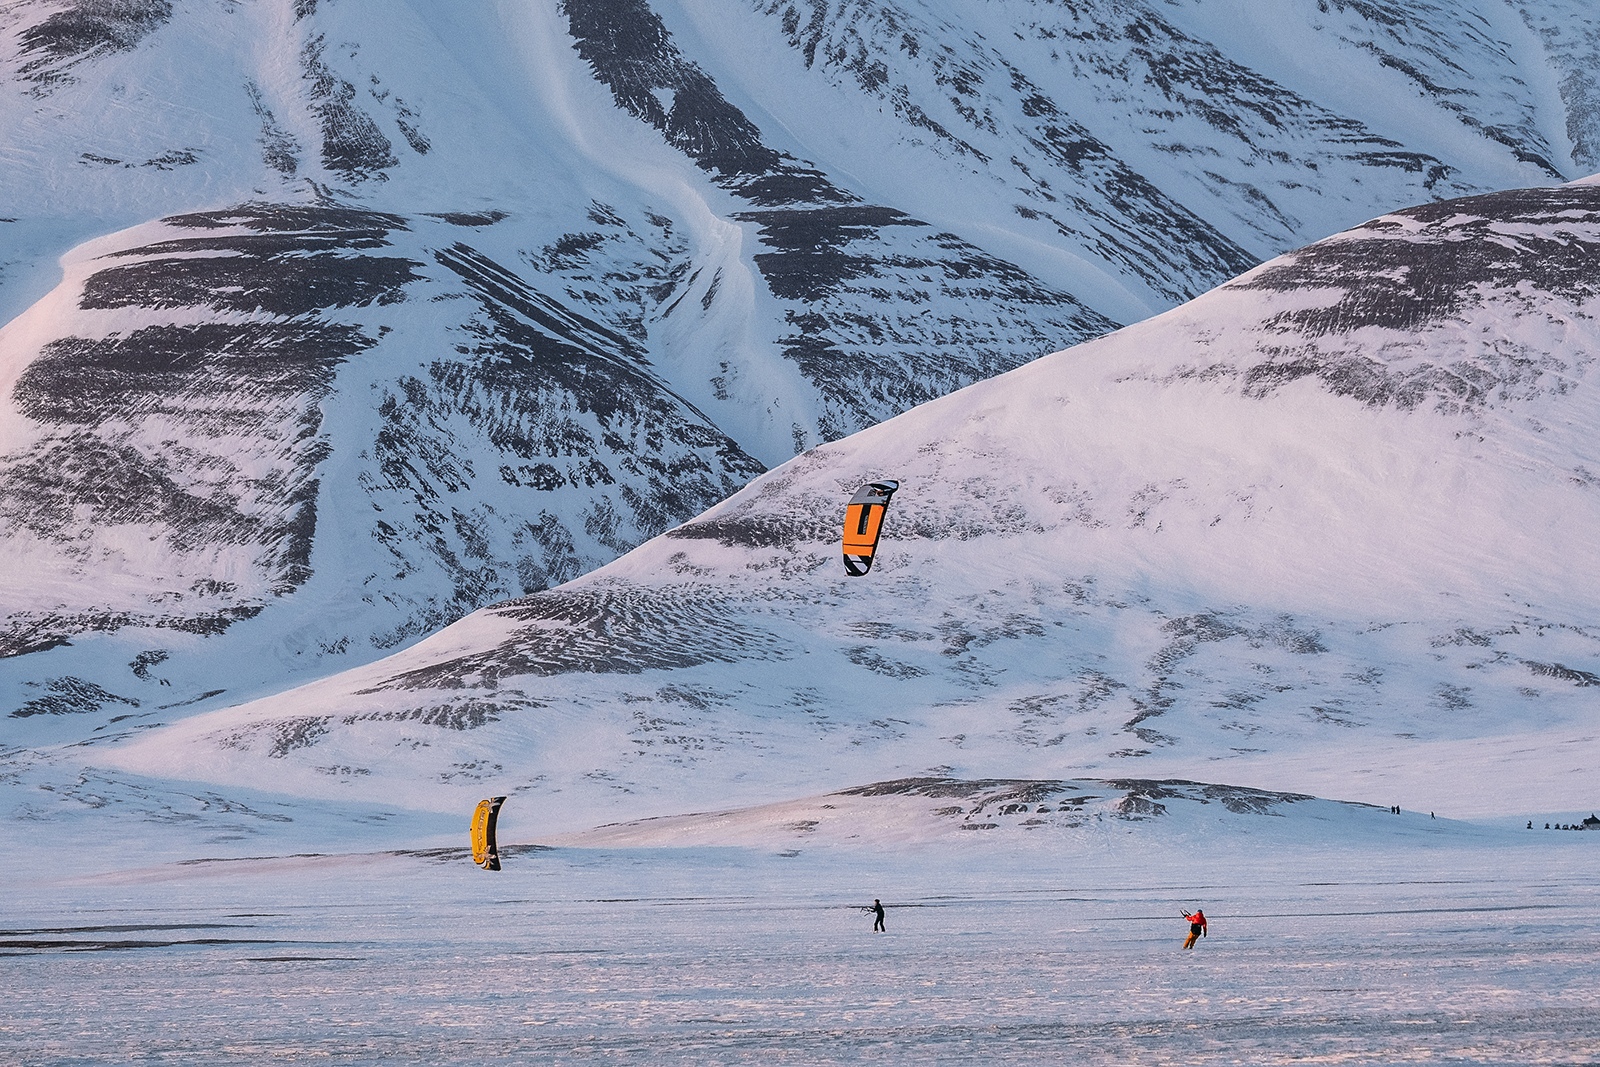 TheKiteMag 50 The Mission Kari Schibevaag by Tommy Simonsen 11 - The Mission: Into the Wild